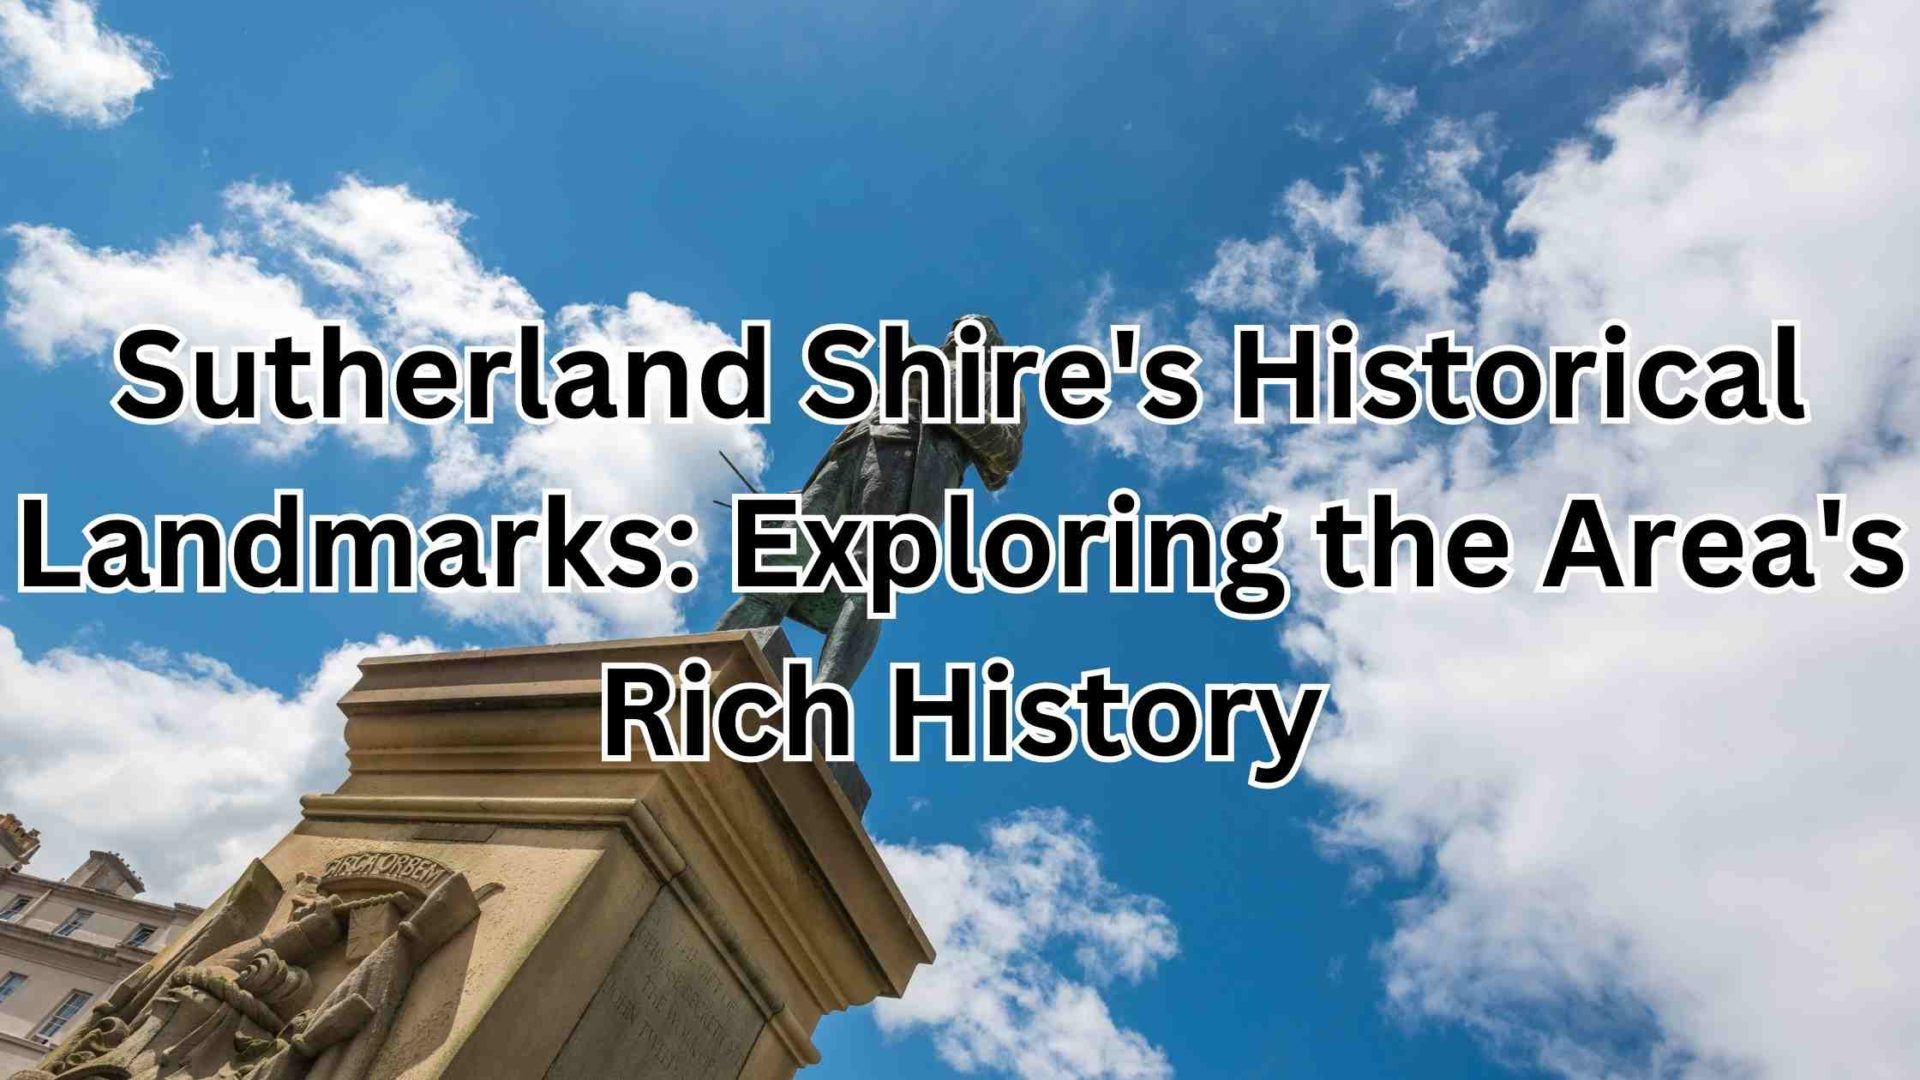 Sutherland Shire's Historical Landmarks: Exploring the Area's Rich History